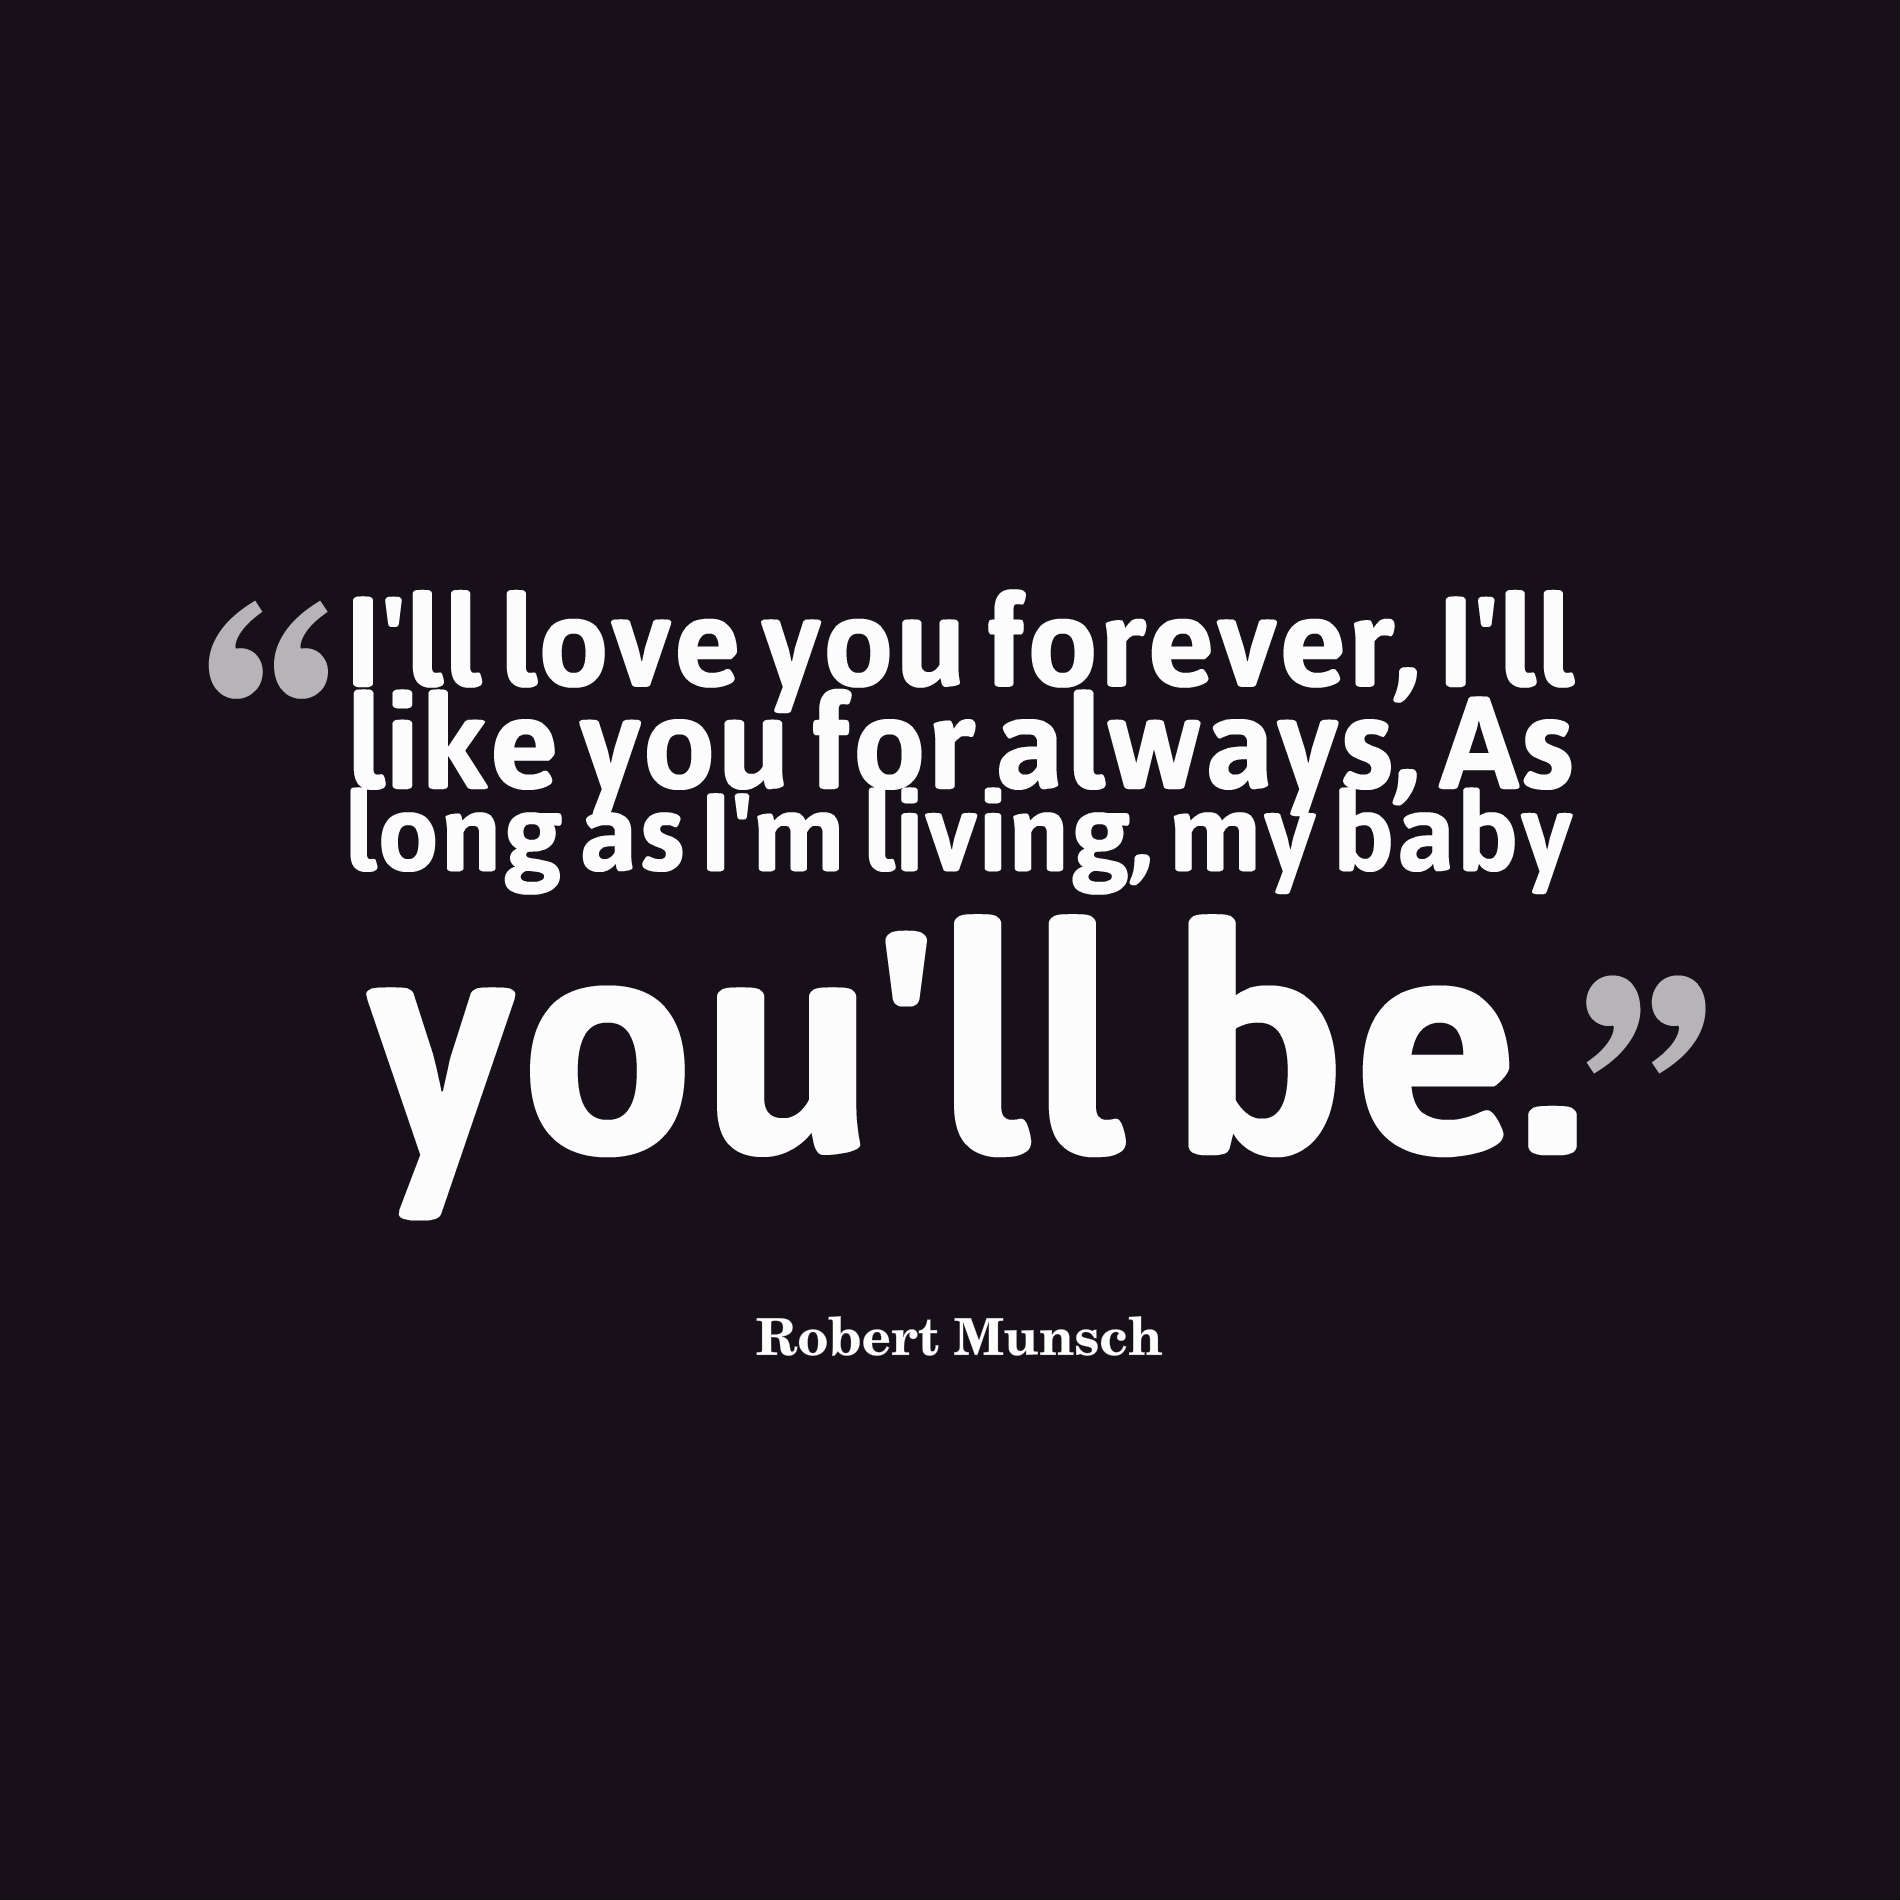 I'll love you forever, I'll like you for always, As long as I'm living, my baby you'll be.